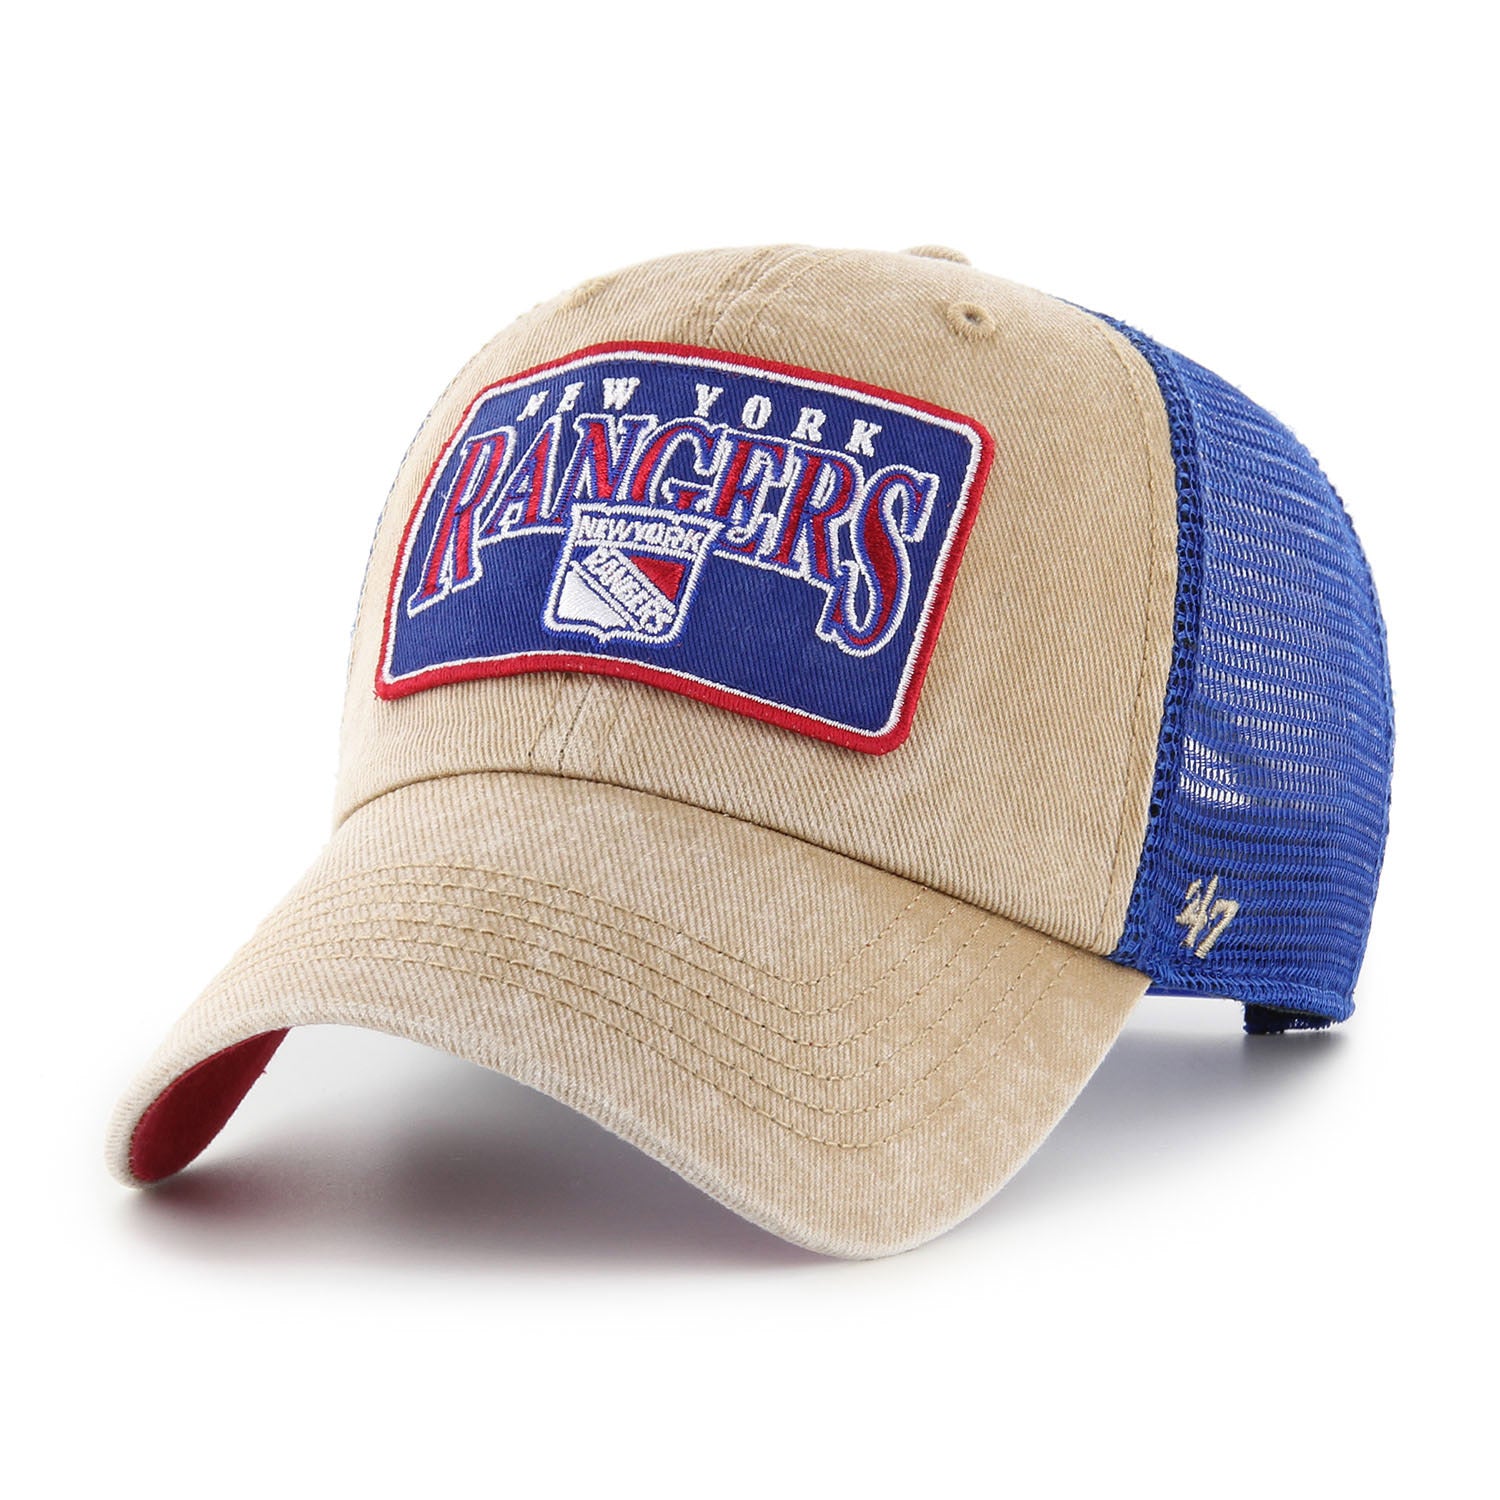 '47 Brand Rangers Dial Khaki Clean Up Hat In Tan & Blue - Front View